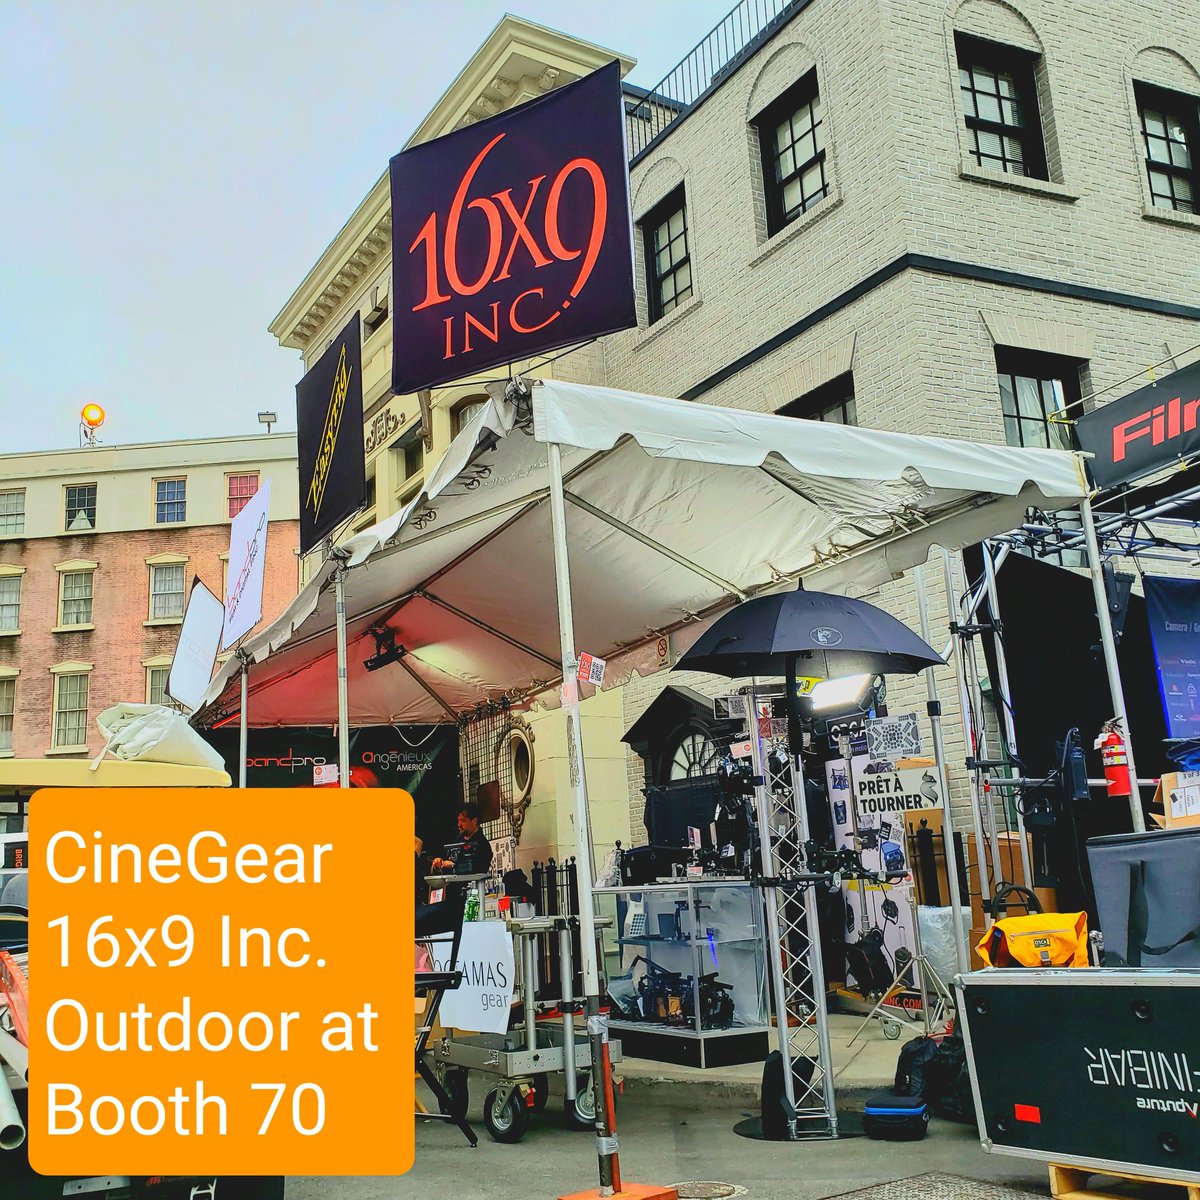 #16x9Inc is ready for #2023cinegearexpola exhibits tomorrow!
Join us during the Exhibit Dates of June 2 - 3, 2023
The Studios at Paramount
We will be on the NY Streets - Outdoor at Booth 70  #easyrig #nogaarms #prêtàtourner #flowcine #orcabags #movcam #orcadslr #OCTAMASGear